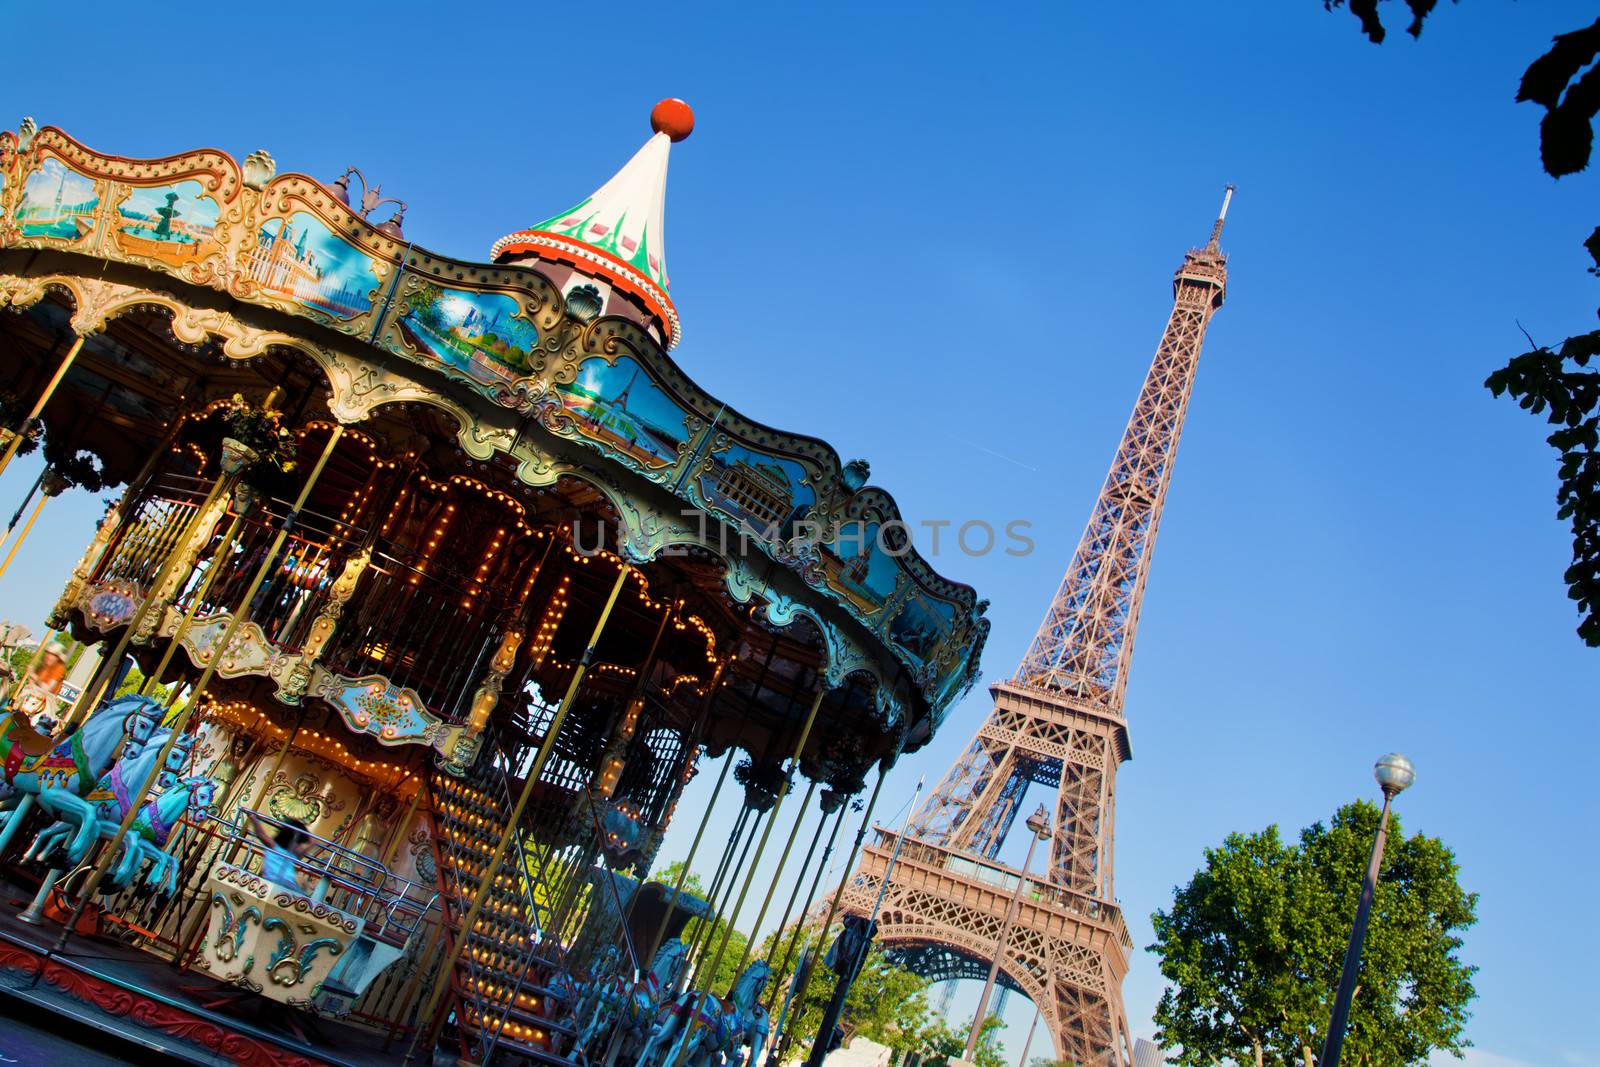 Eiffel Tower and vintage carousel, Paris, France by photocreo